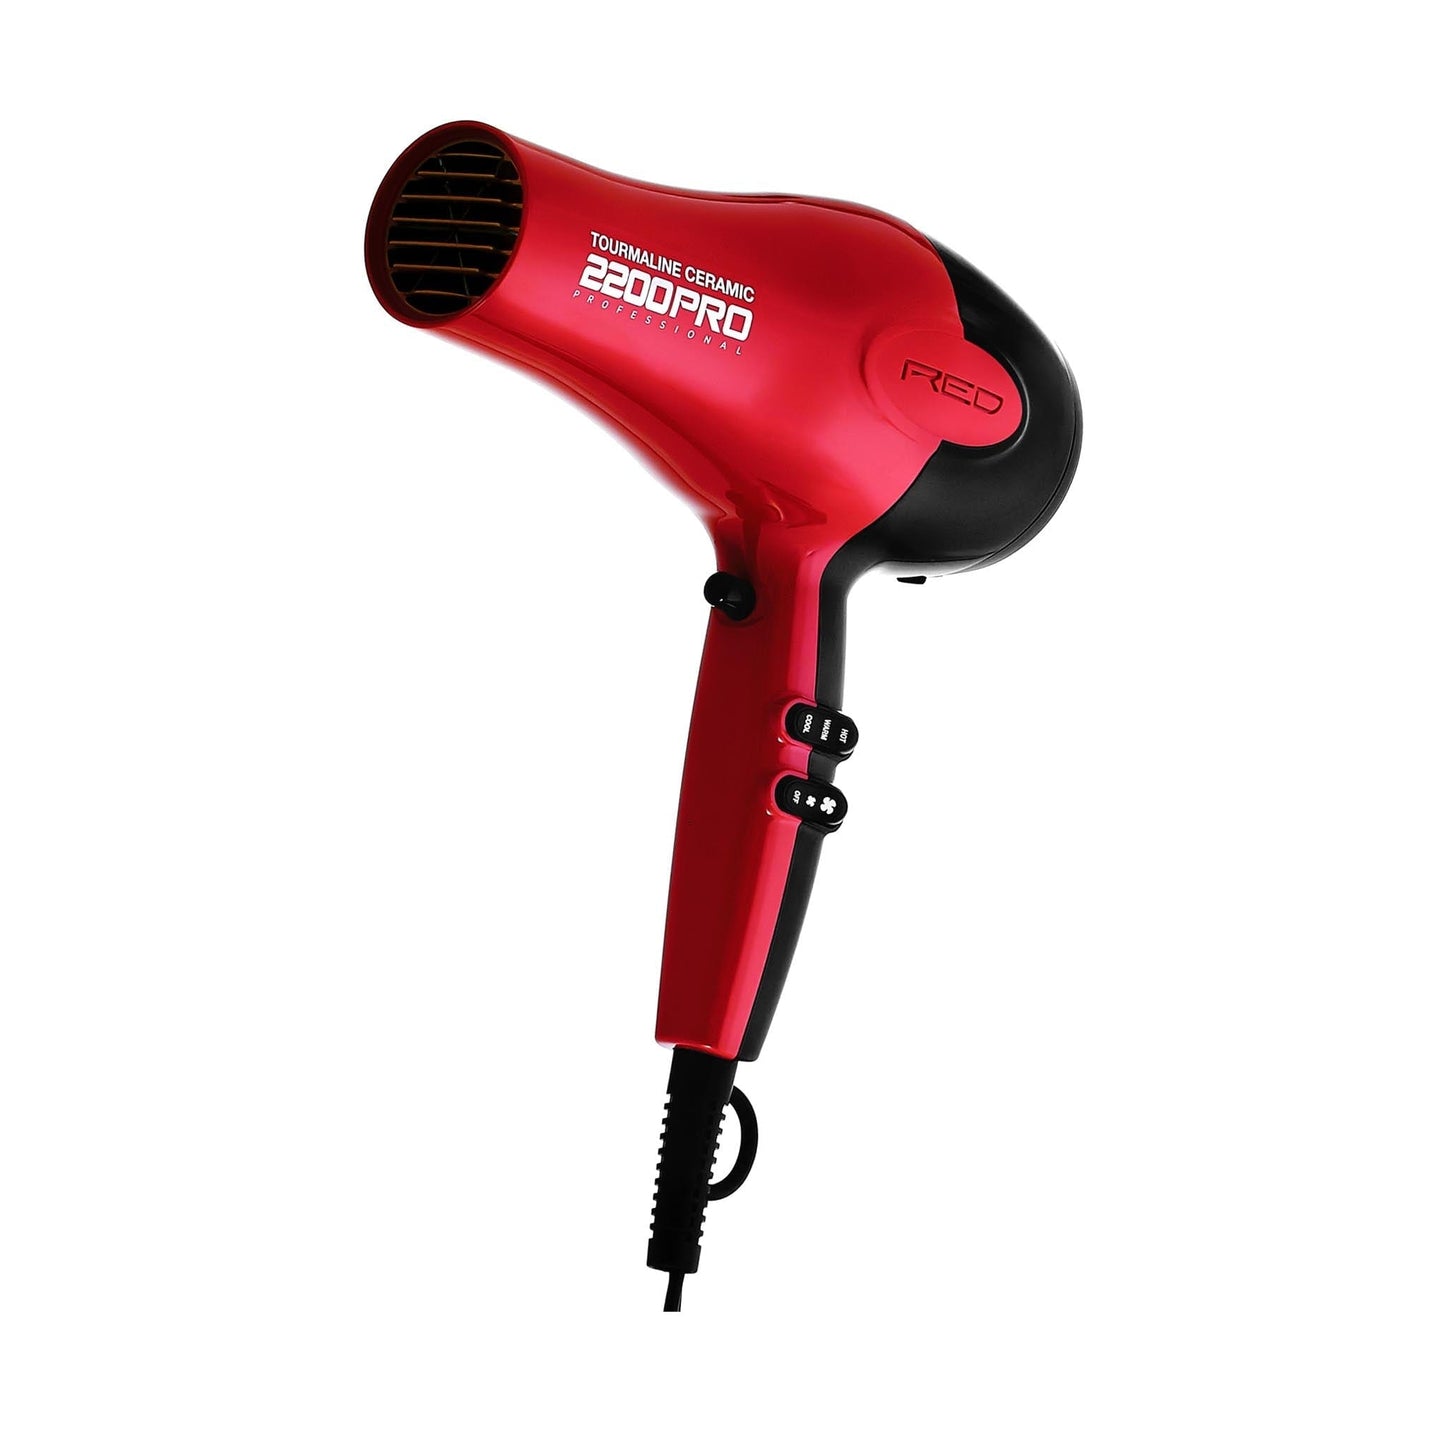 Red by Kiss Tourmaline Ceramic 2200 Professional Blow Dryer BD07N